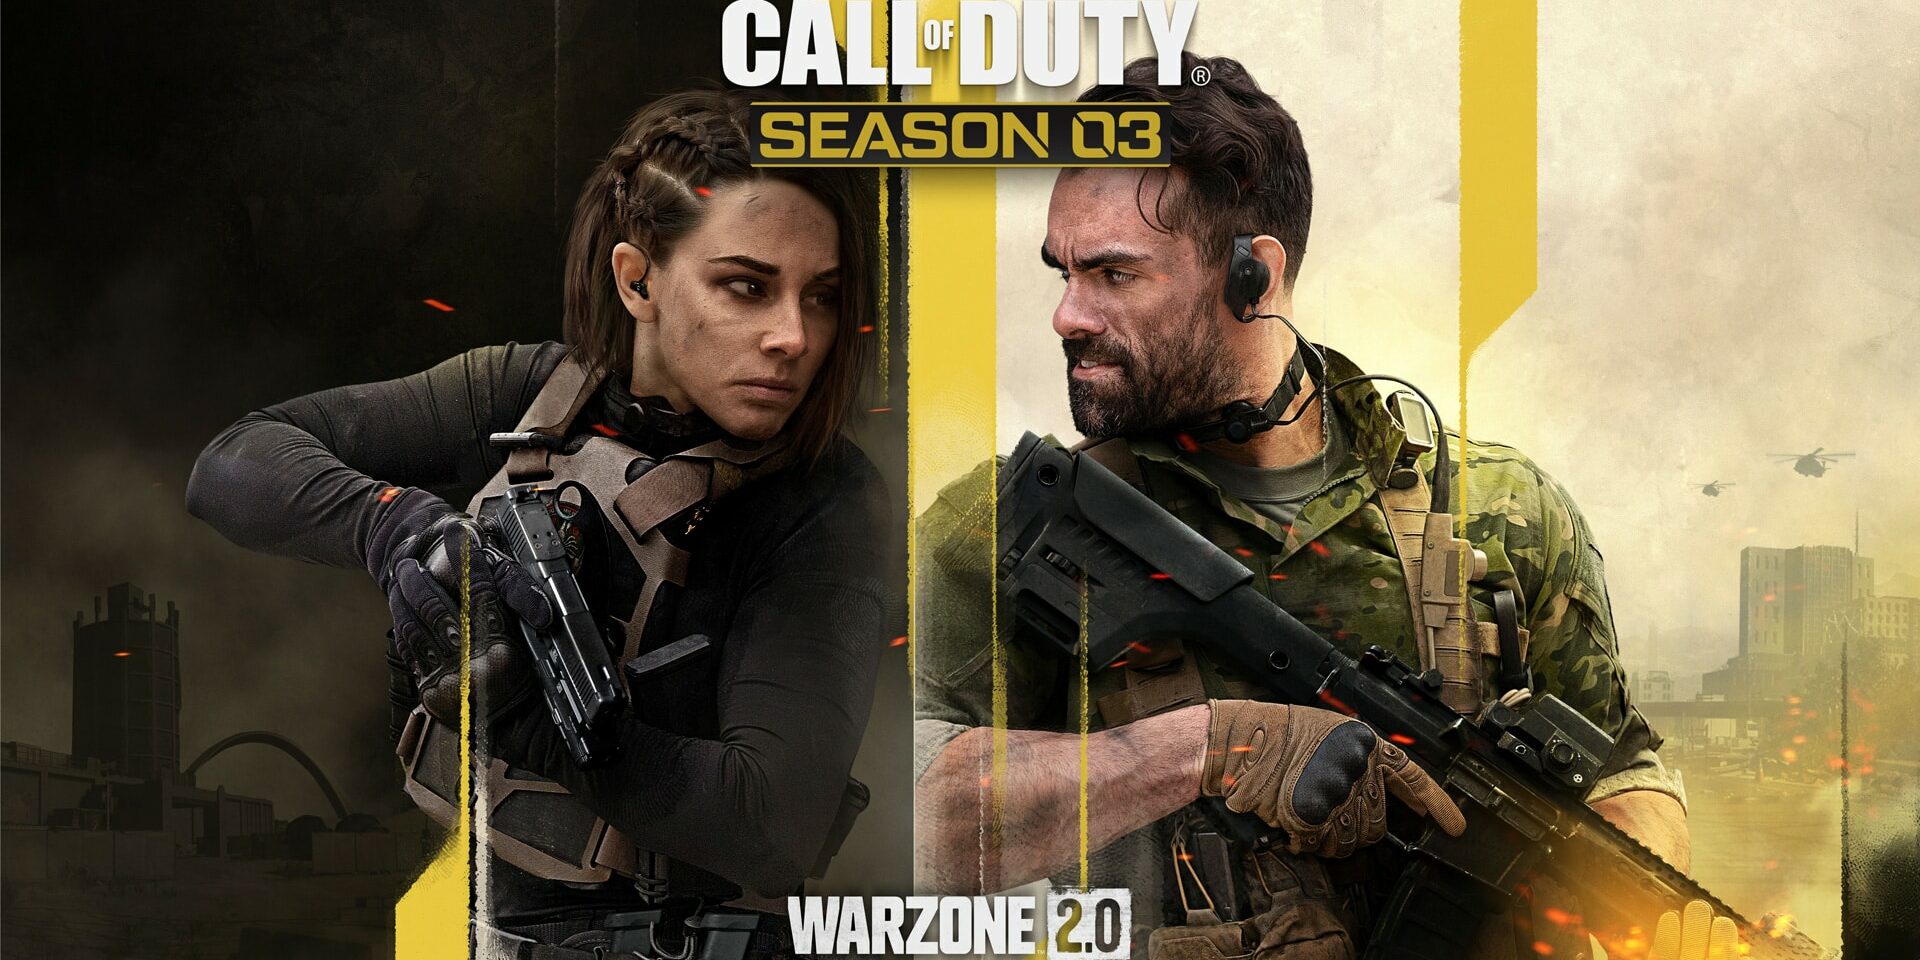 Warzone 2 Season 2 Reloaded is already getting loads of great content